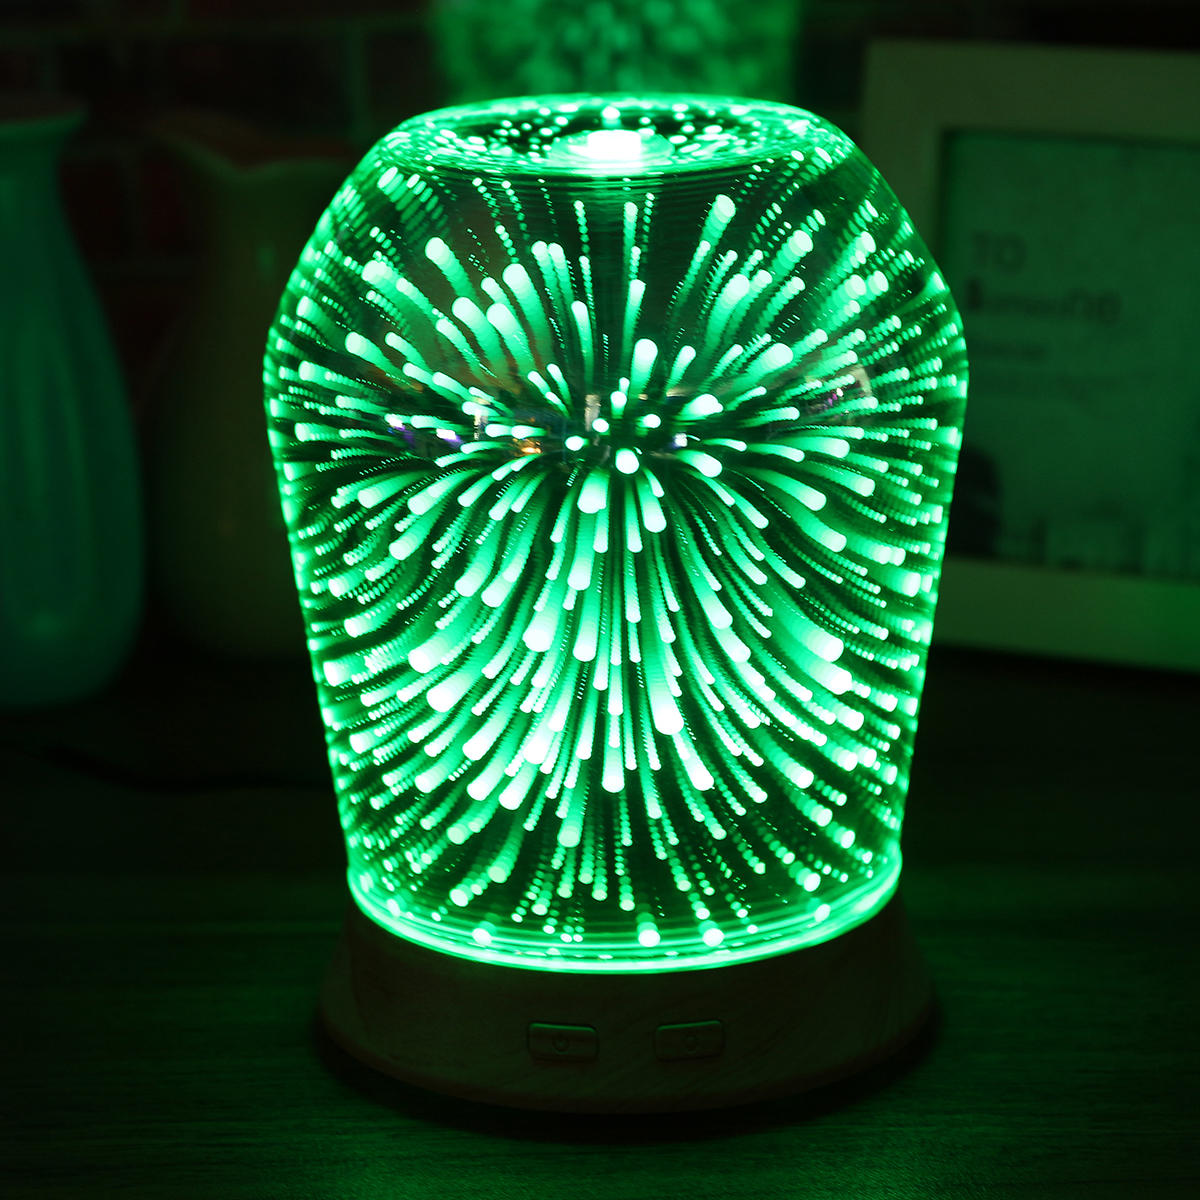 3D LED Ultrasonic Diffuser Humidifier Aromatherapy Essential Oil Diffuser Mist Humidifier